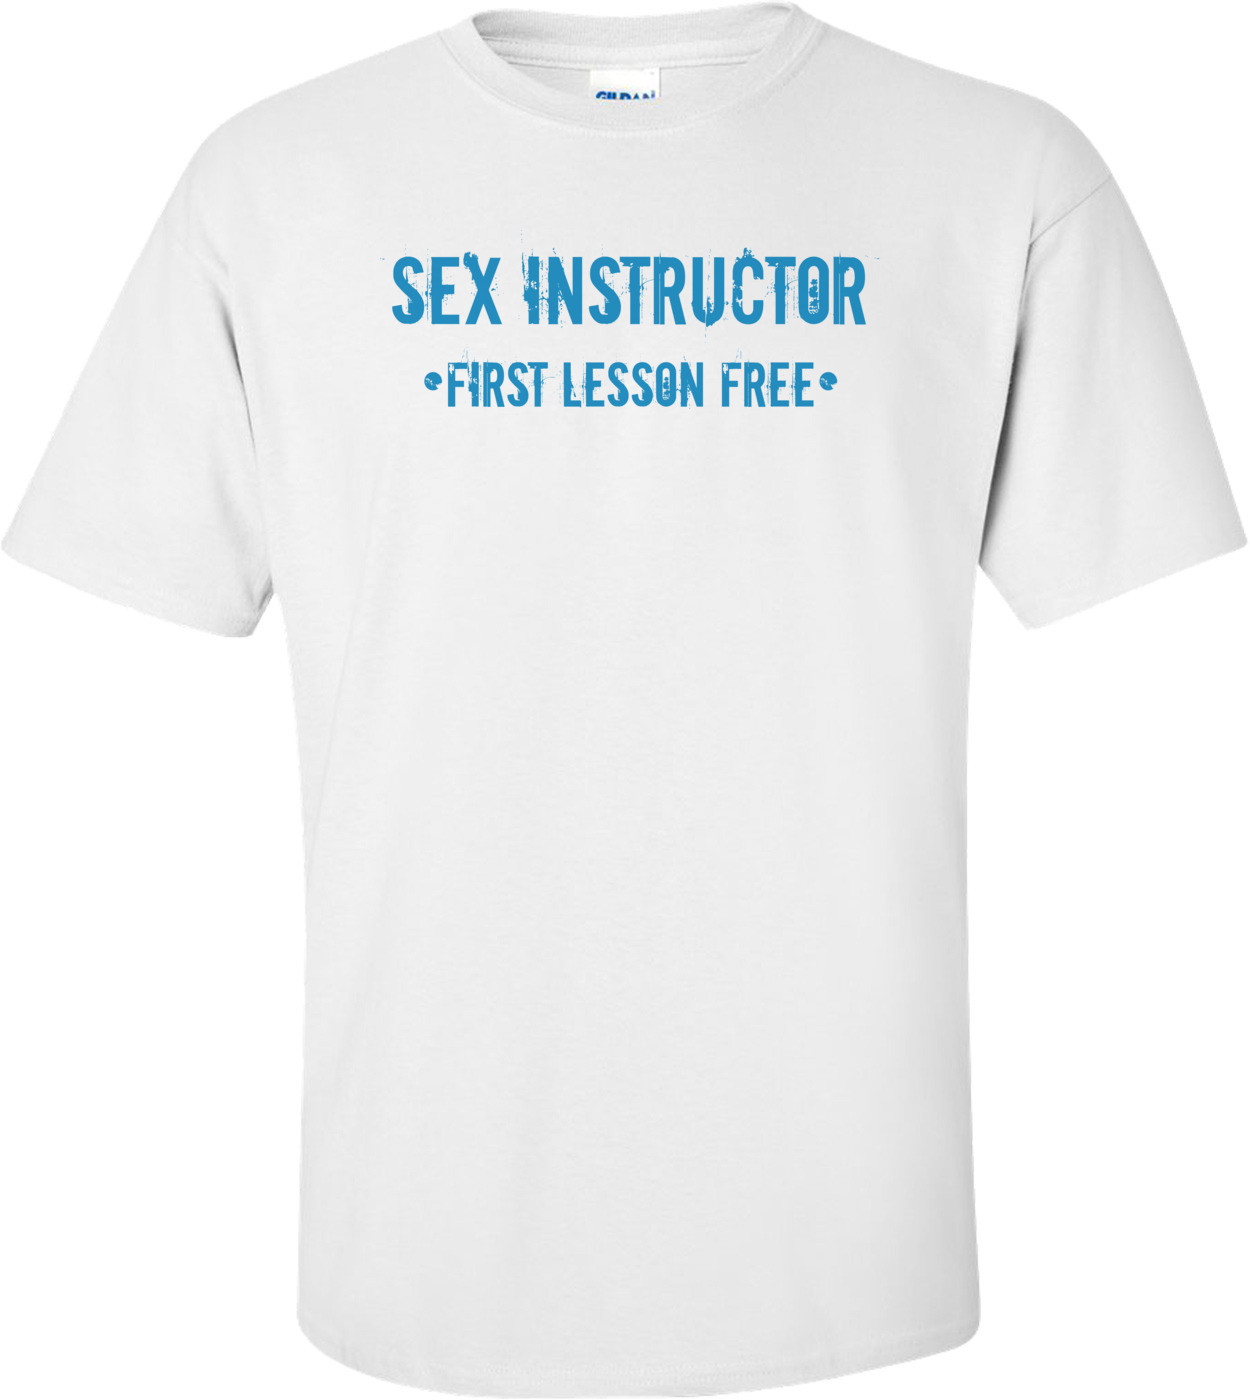 Sex Instructor, First Lesson Free T-shirt 